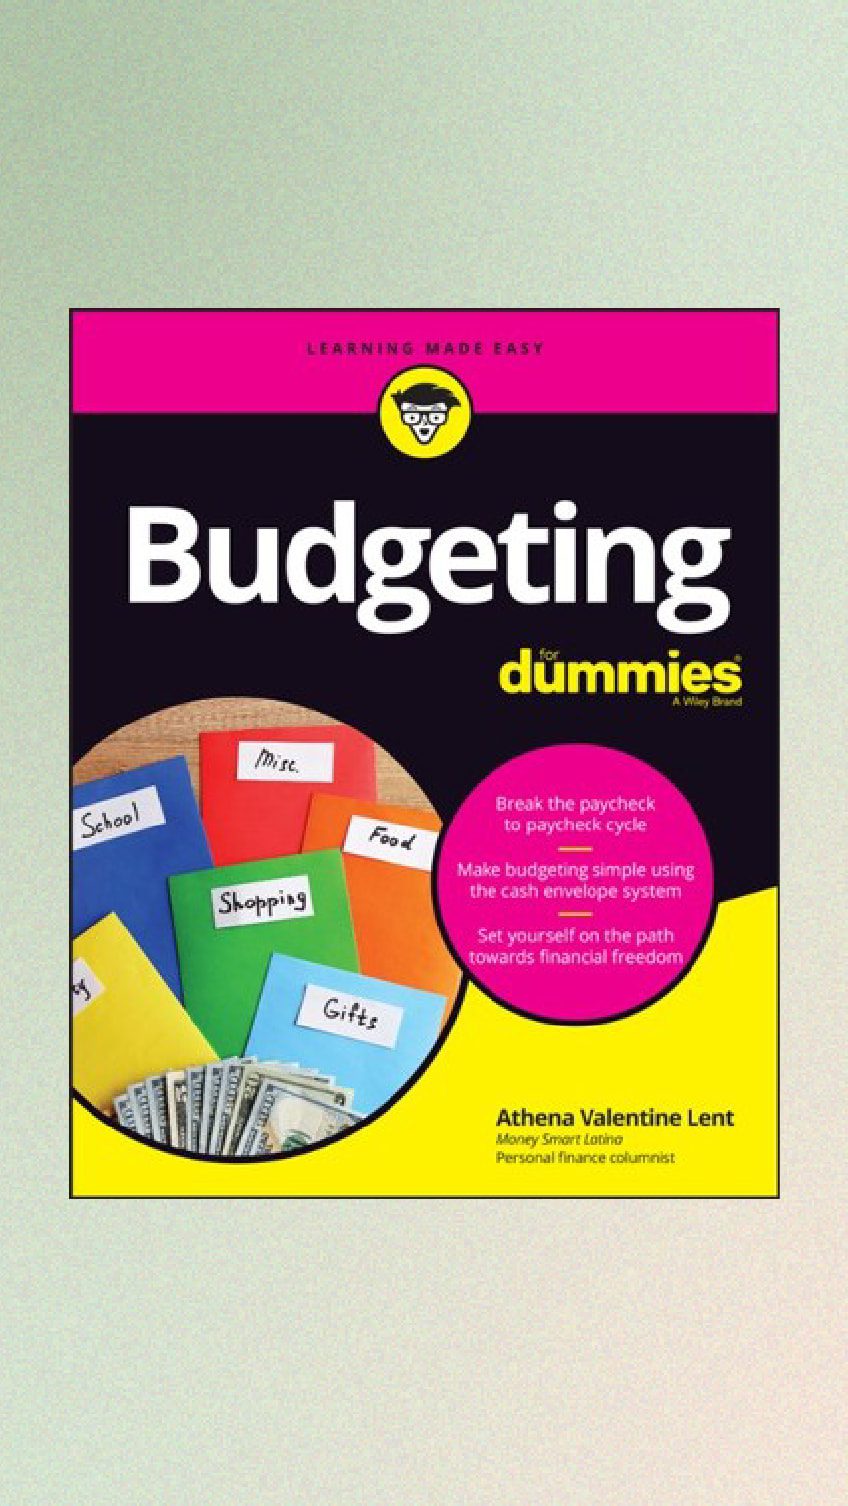 Read the book "Budgeting for Dummies" to build generational wealth.